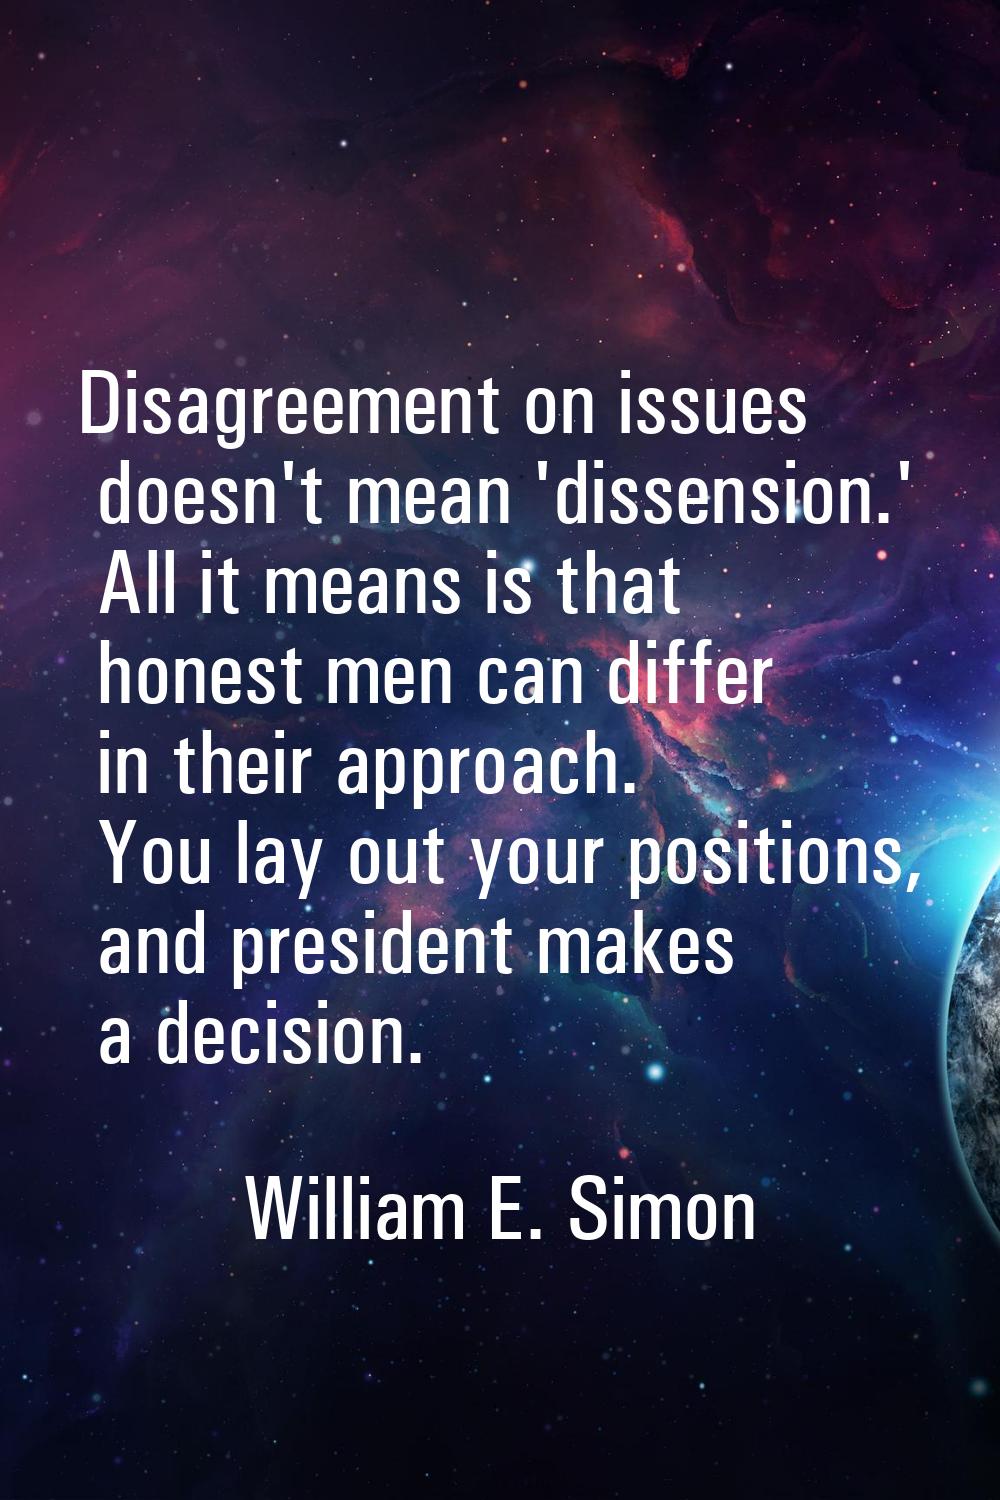 Disagreement on issues doesn't mean 'dissension.' All it means is that honest men can differ in the